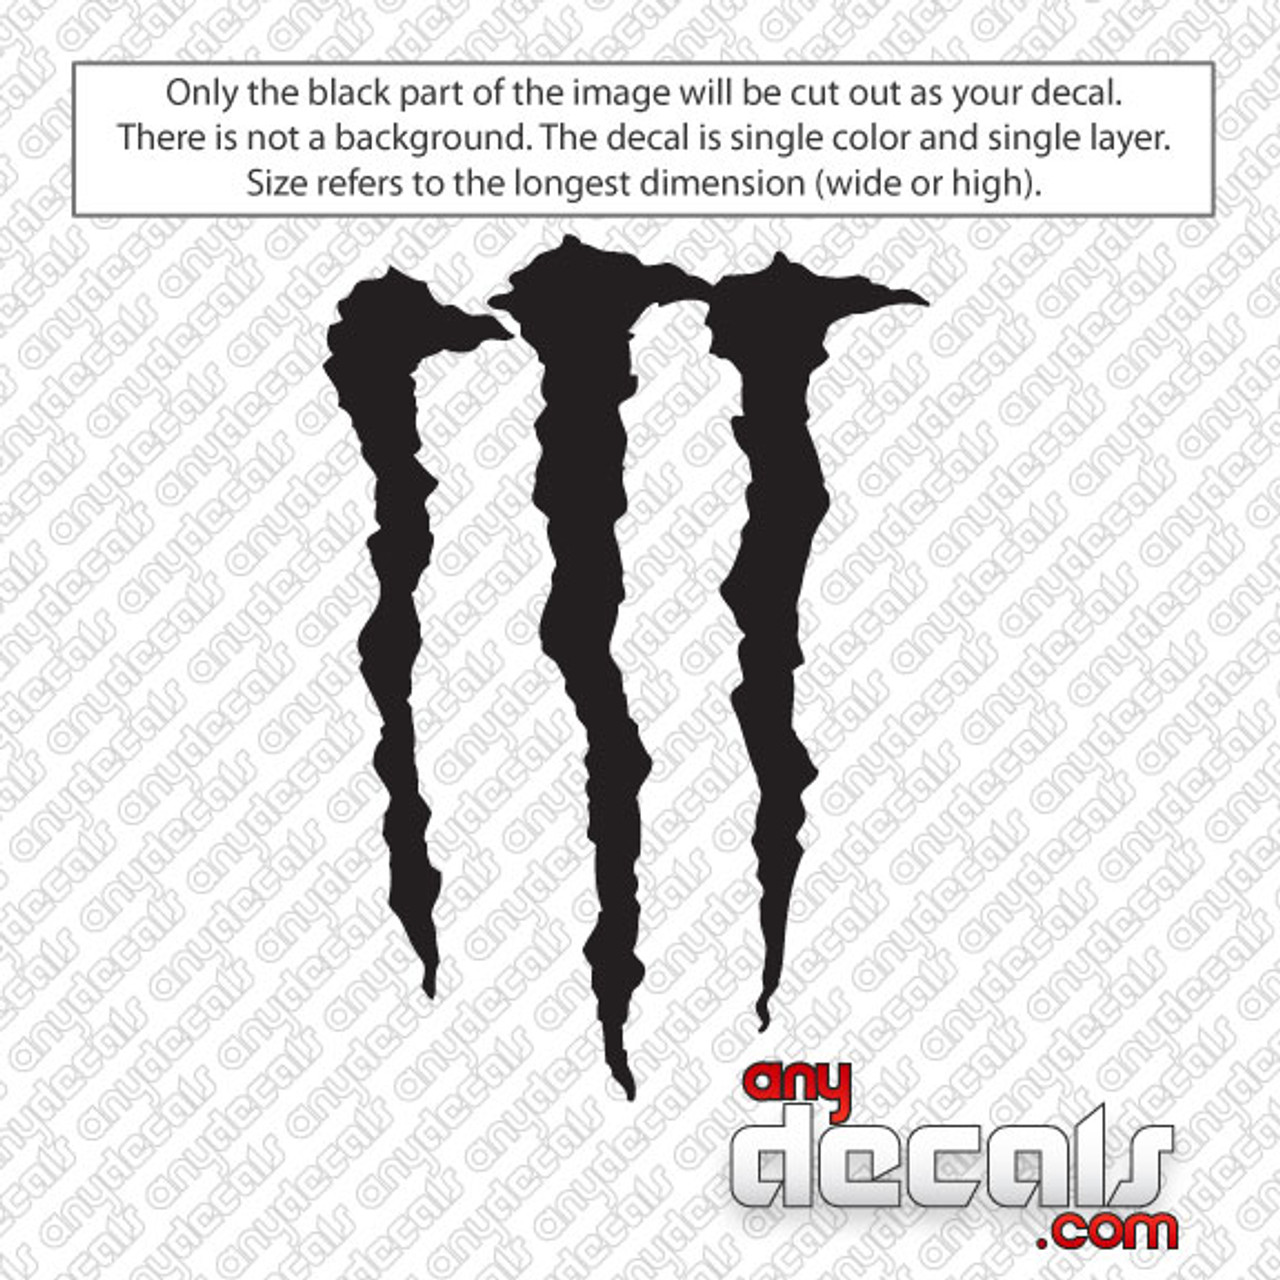 Car Decals - Car Stickers, Monster Energy 'M' Car Decal